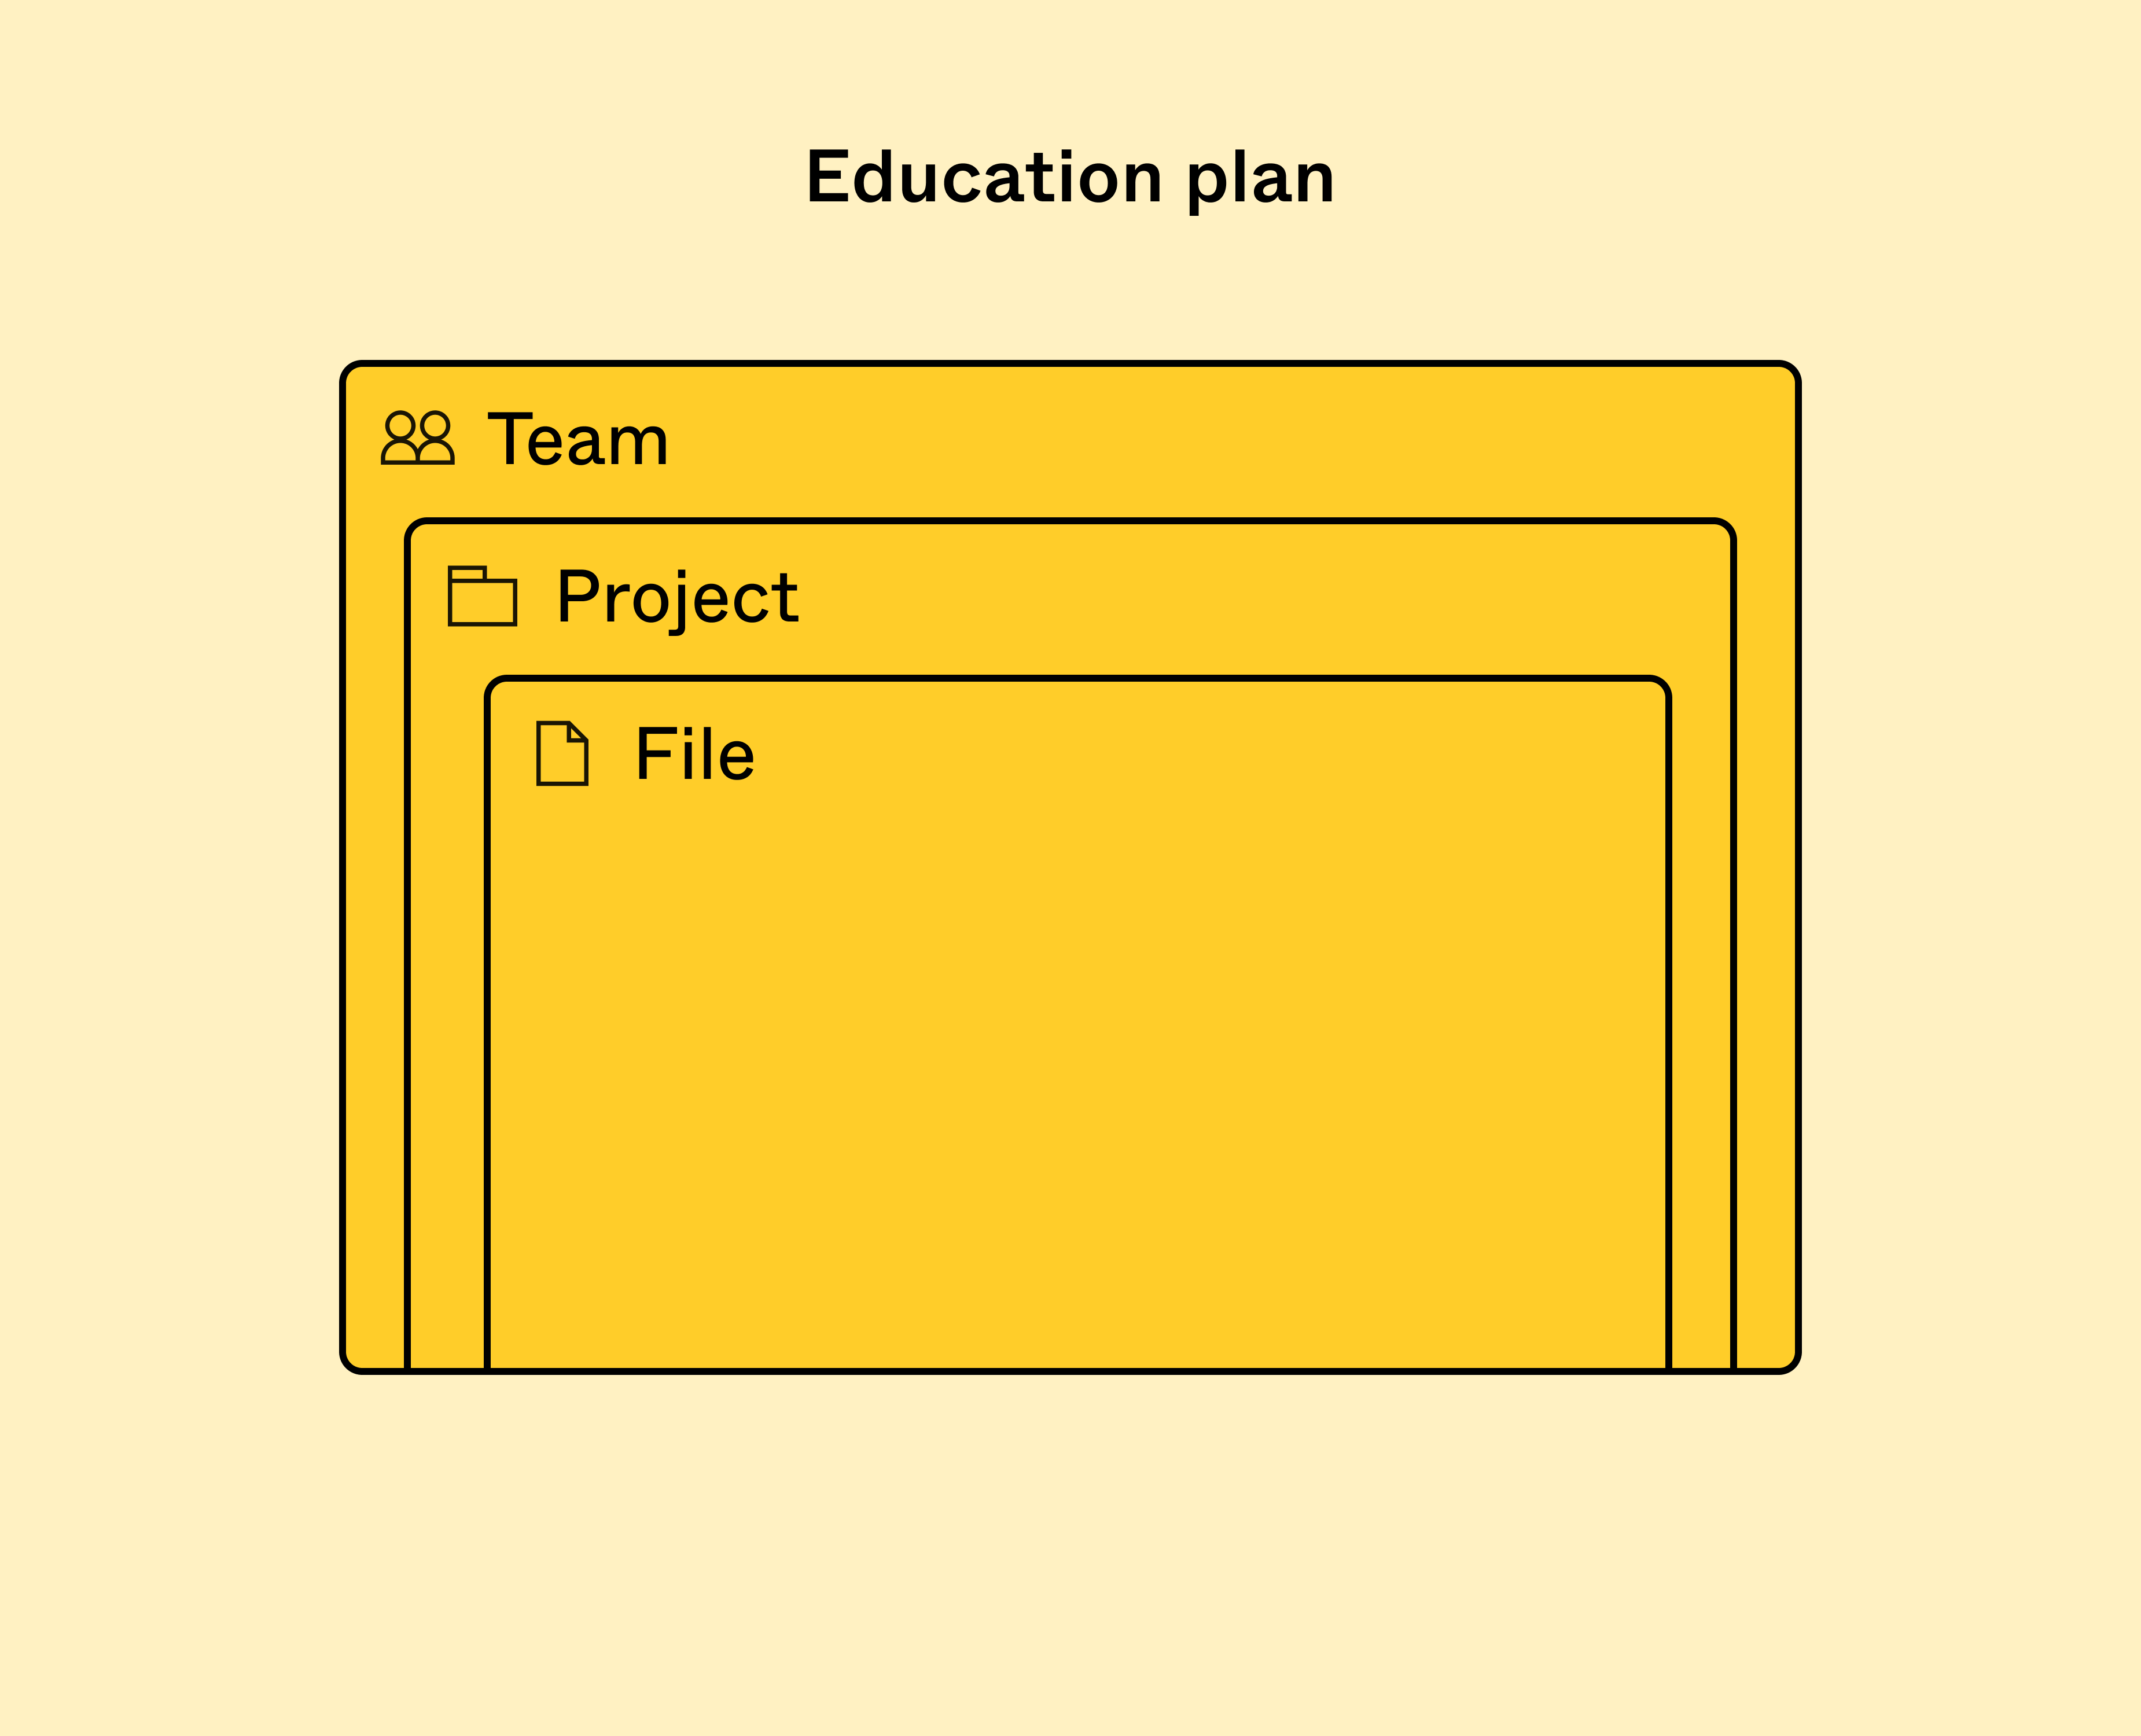 Share the team, projects, or files on the Education plan